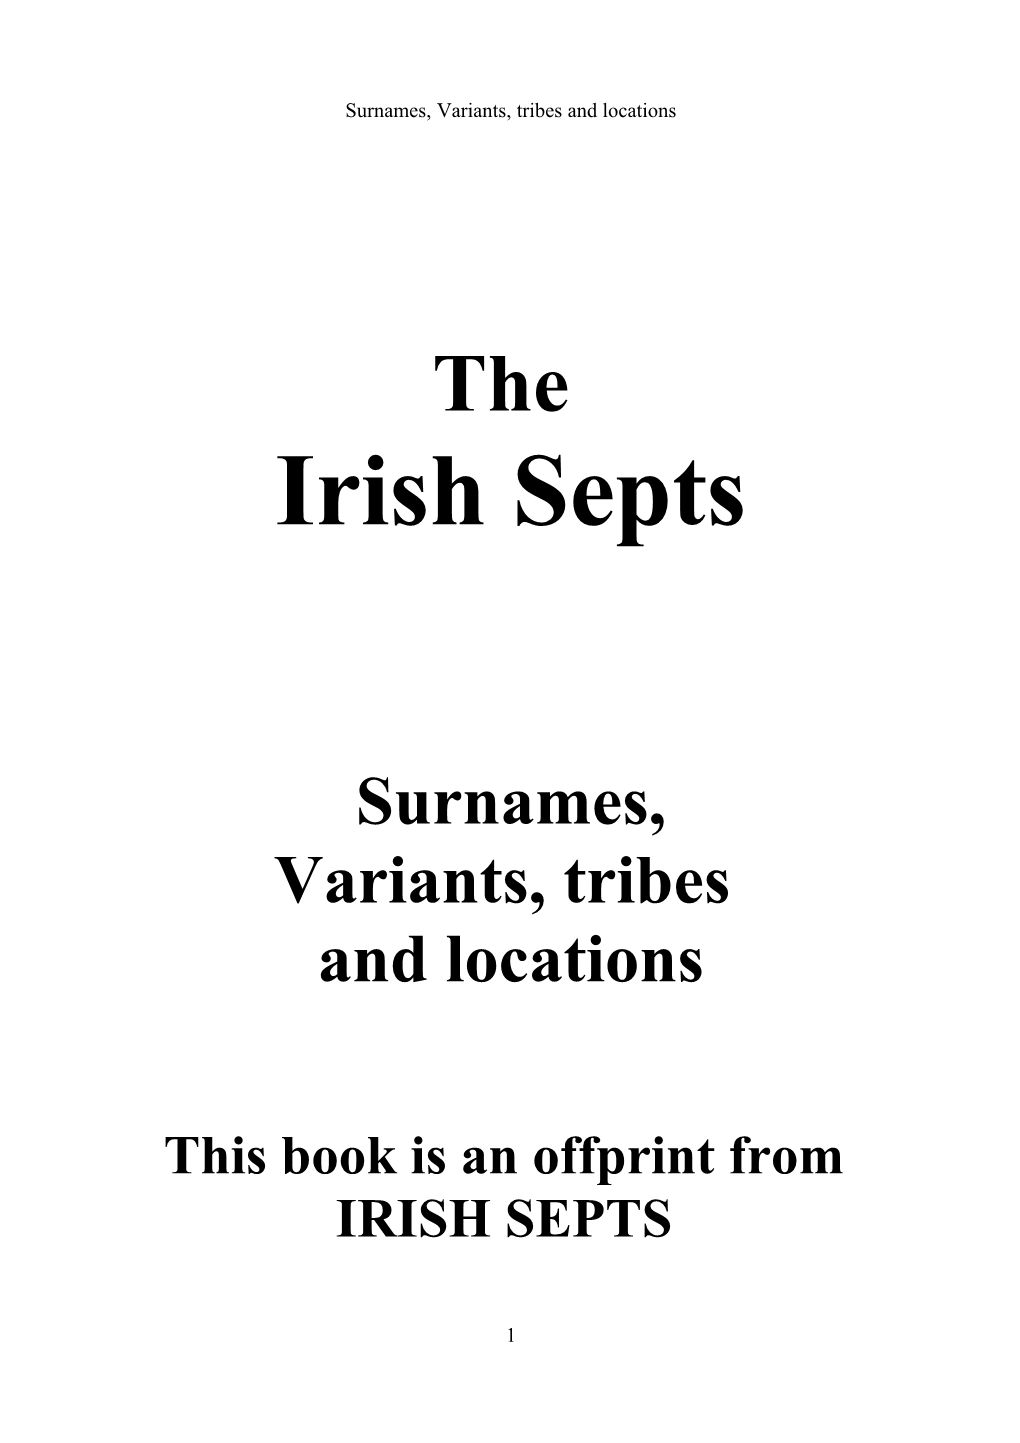 Surnames, Variants, Tribes and Locations